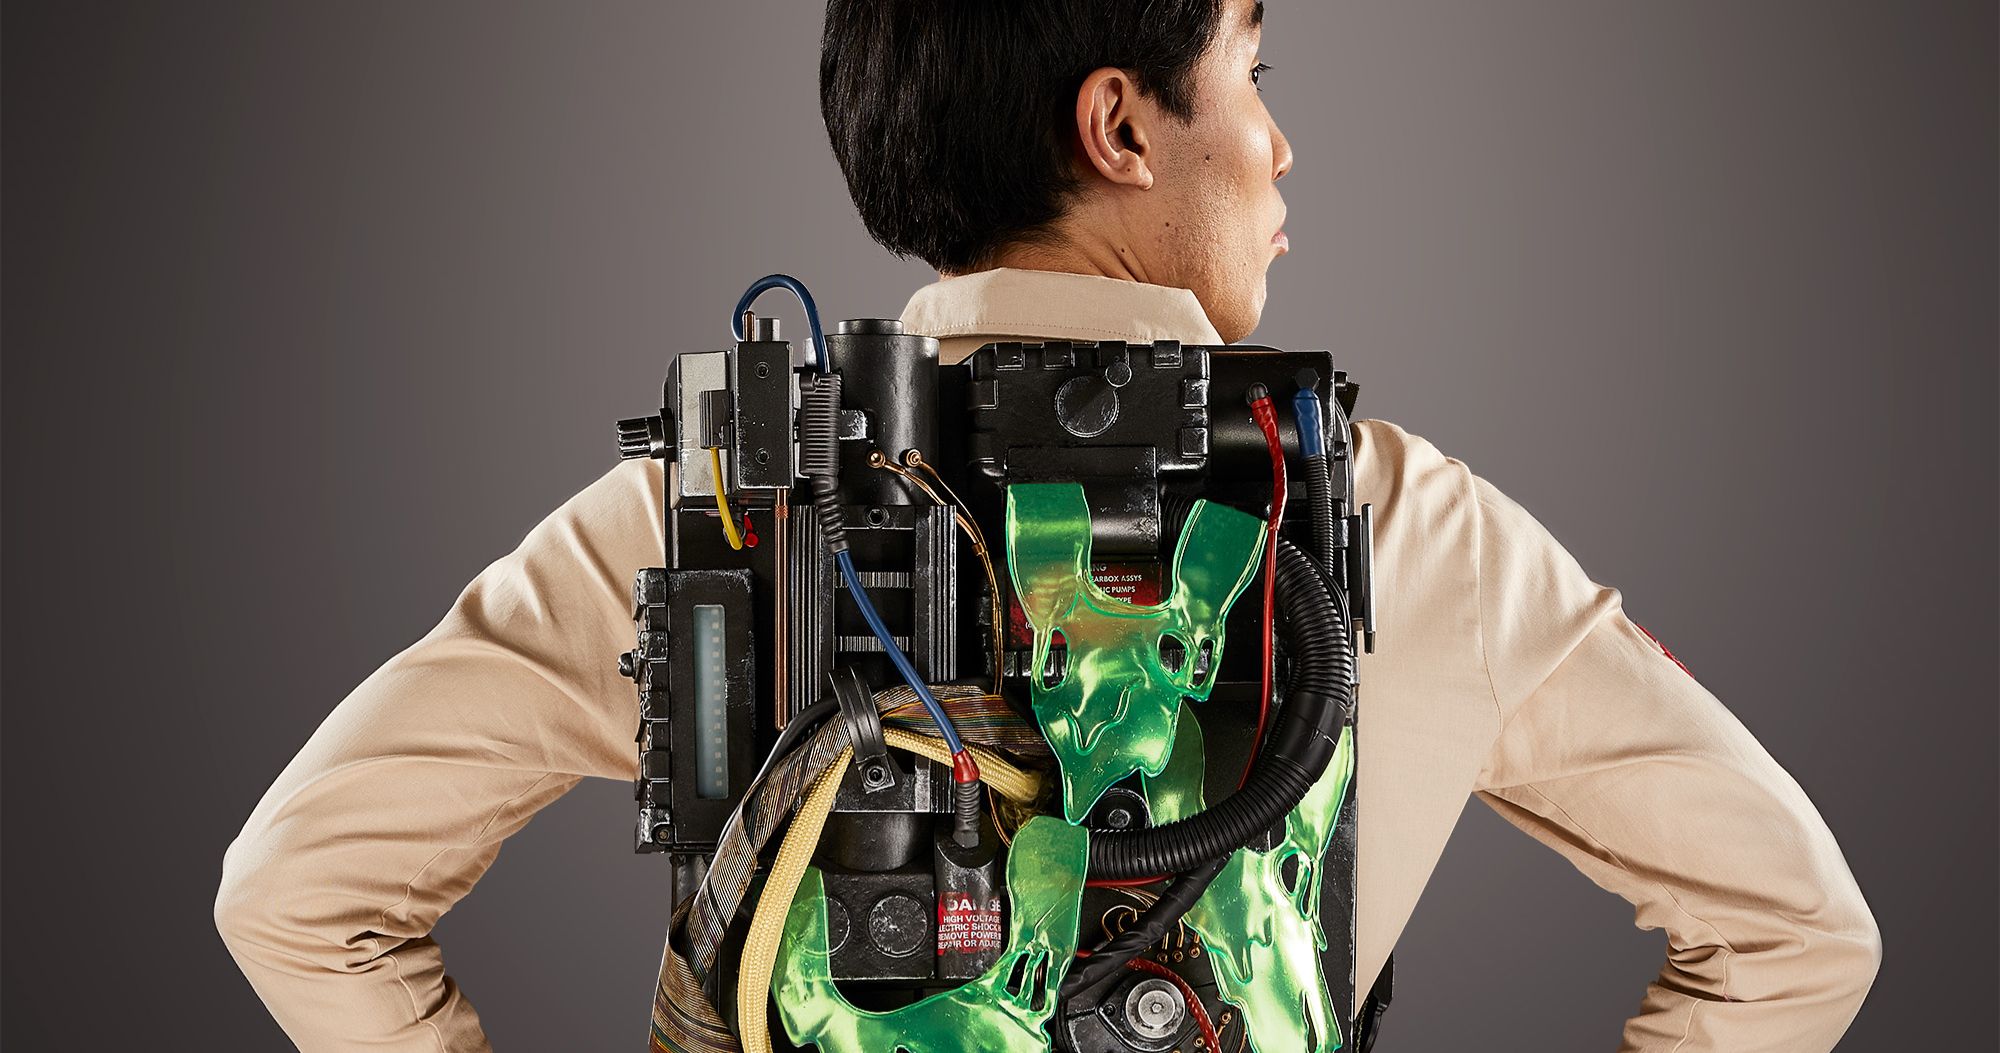 Ghostbusters Proton Pack Replica from Hasbro Will Have Fans Ready to Answer the Call